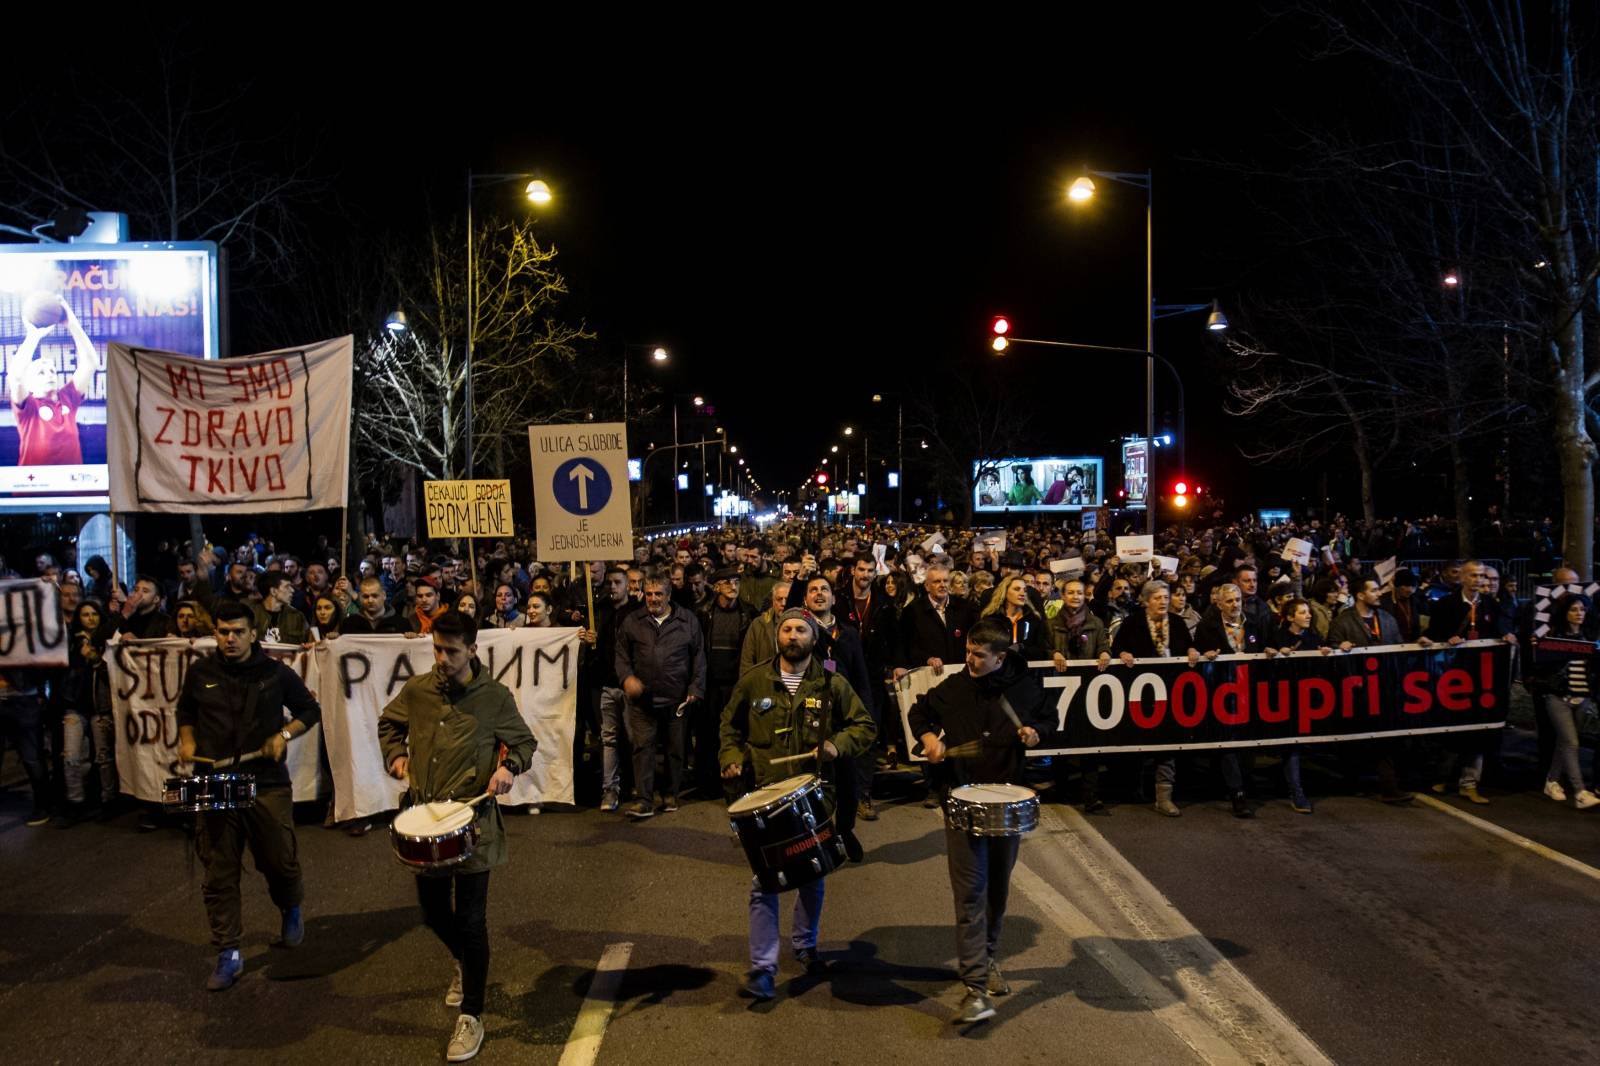 Demonstrators march during civic protest in Podgorica